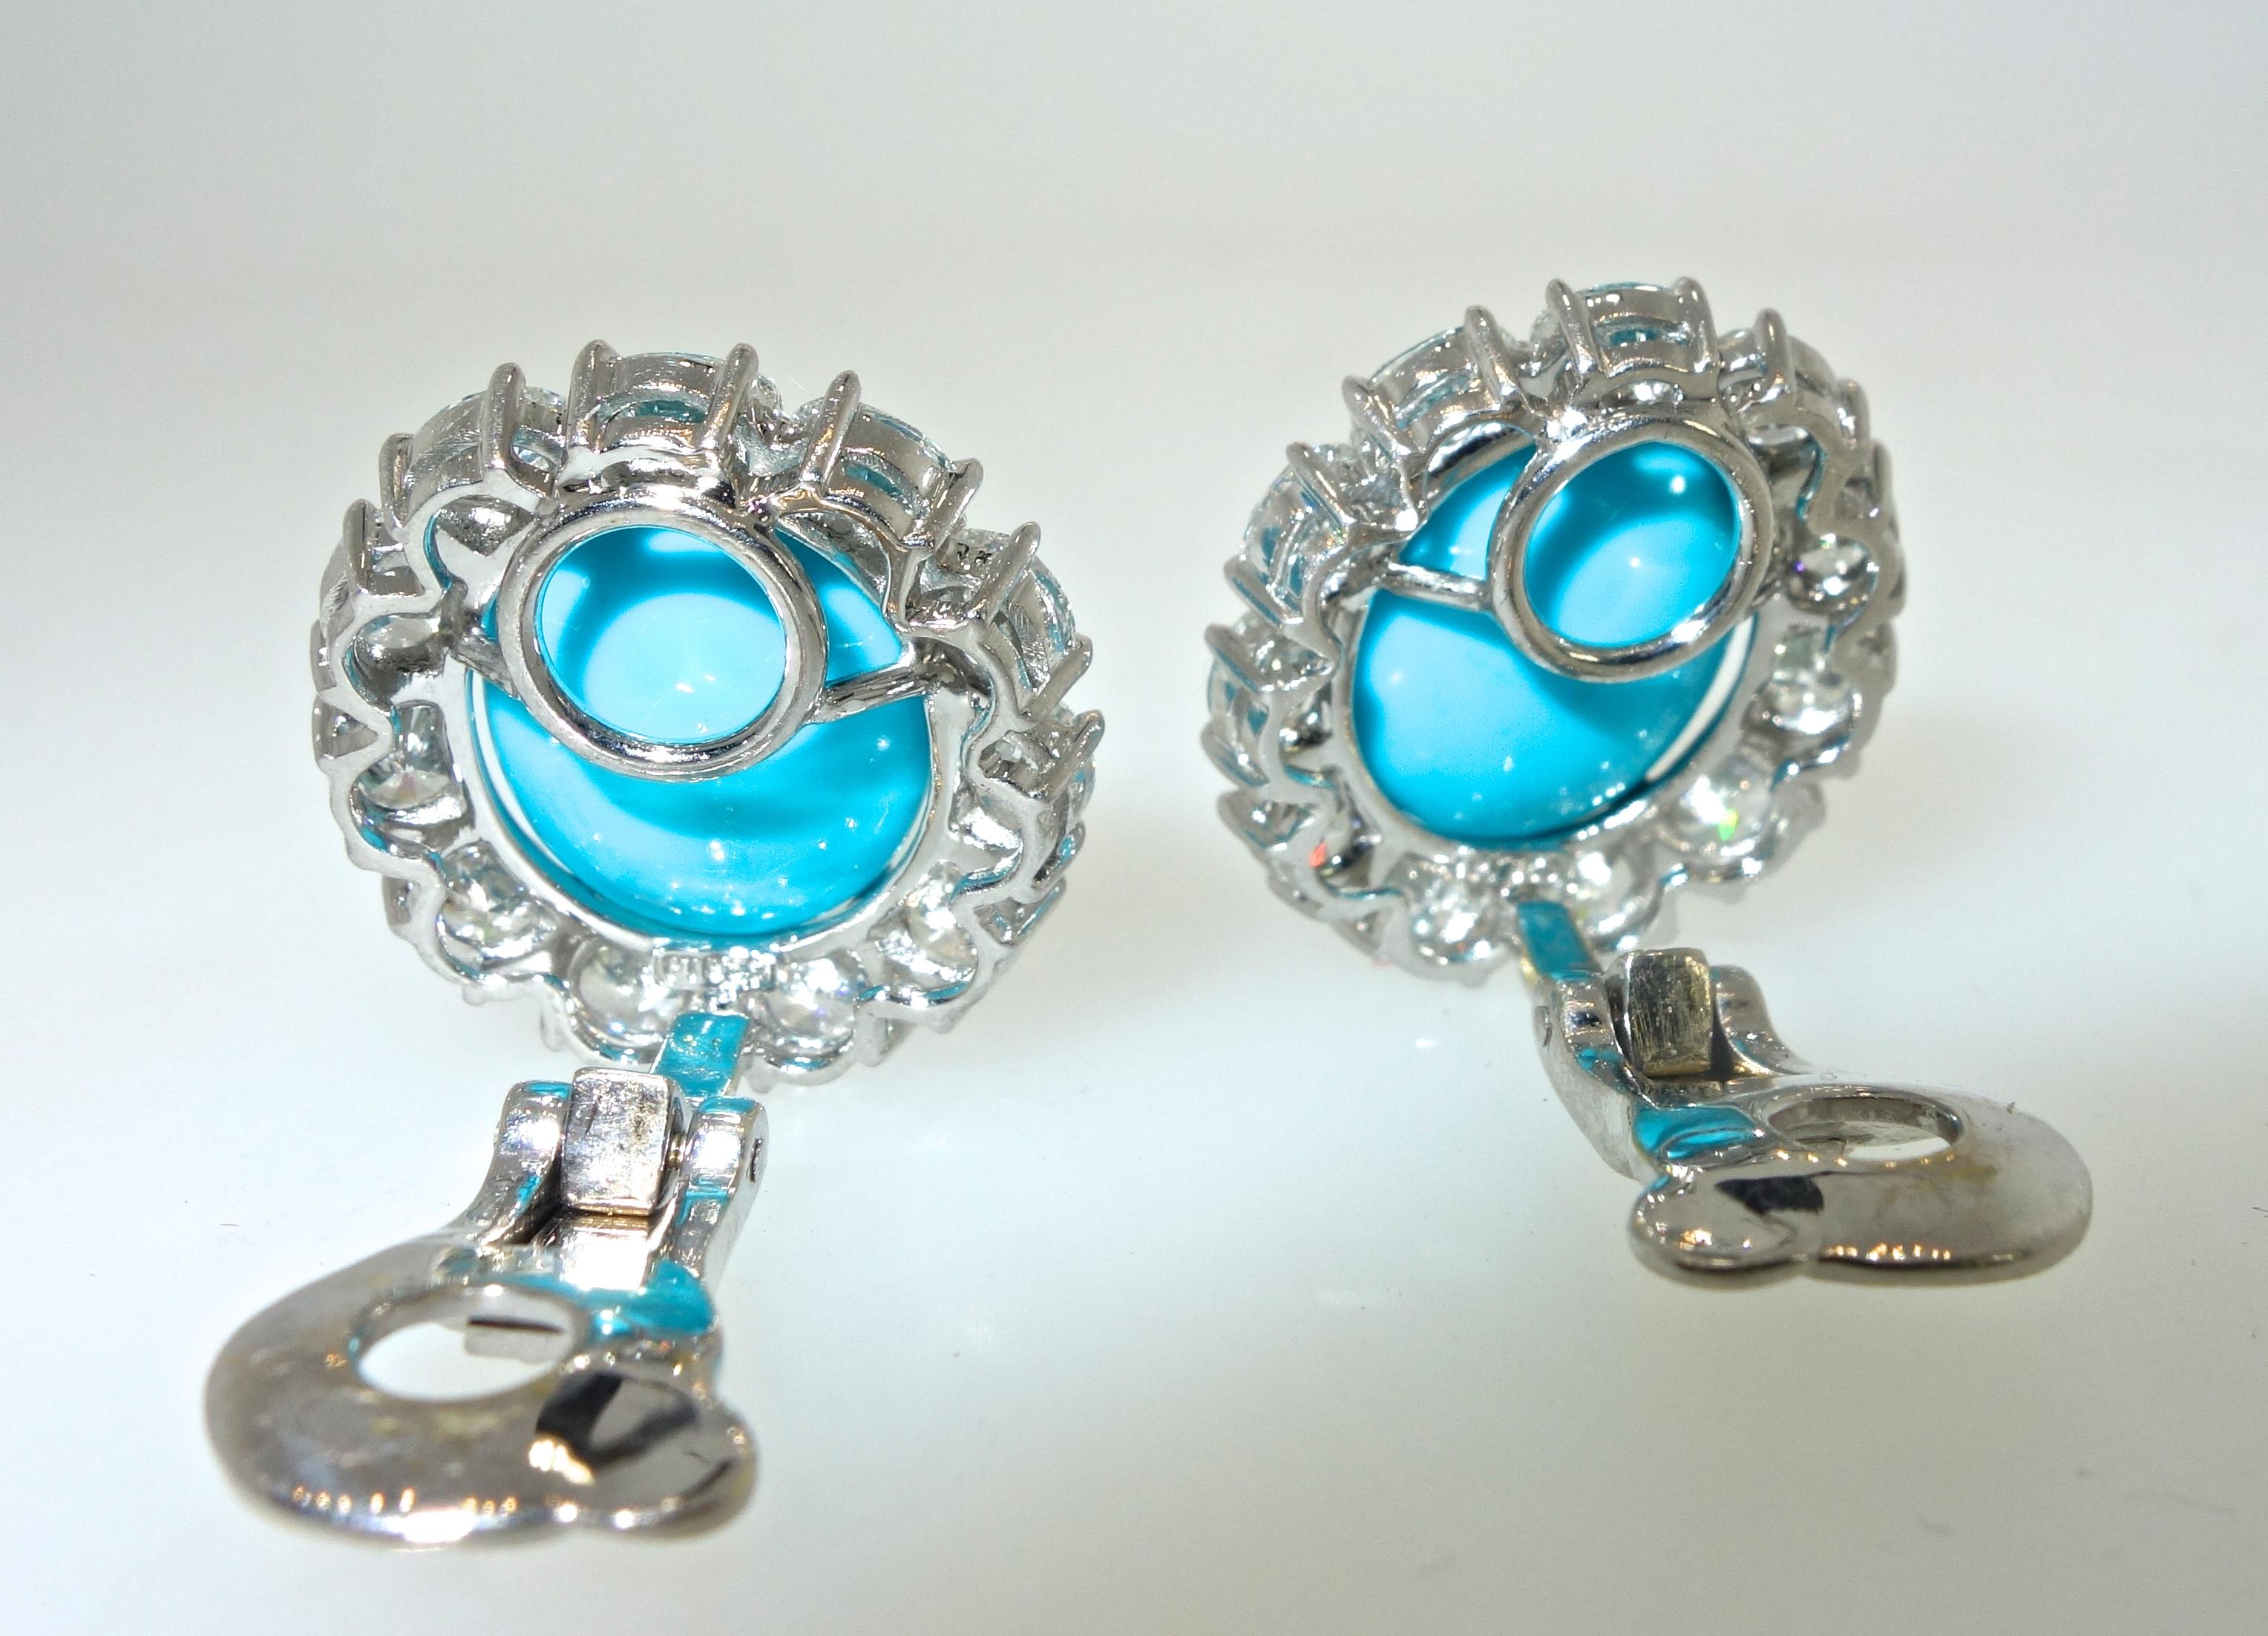 Contemporary Diamond and Turquoise Earrings